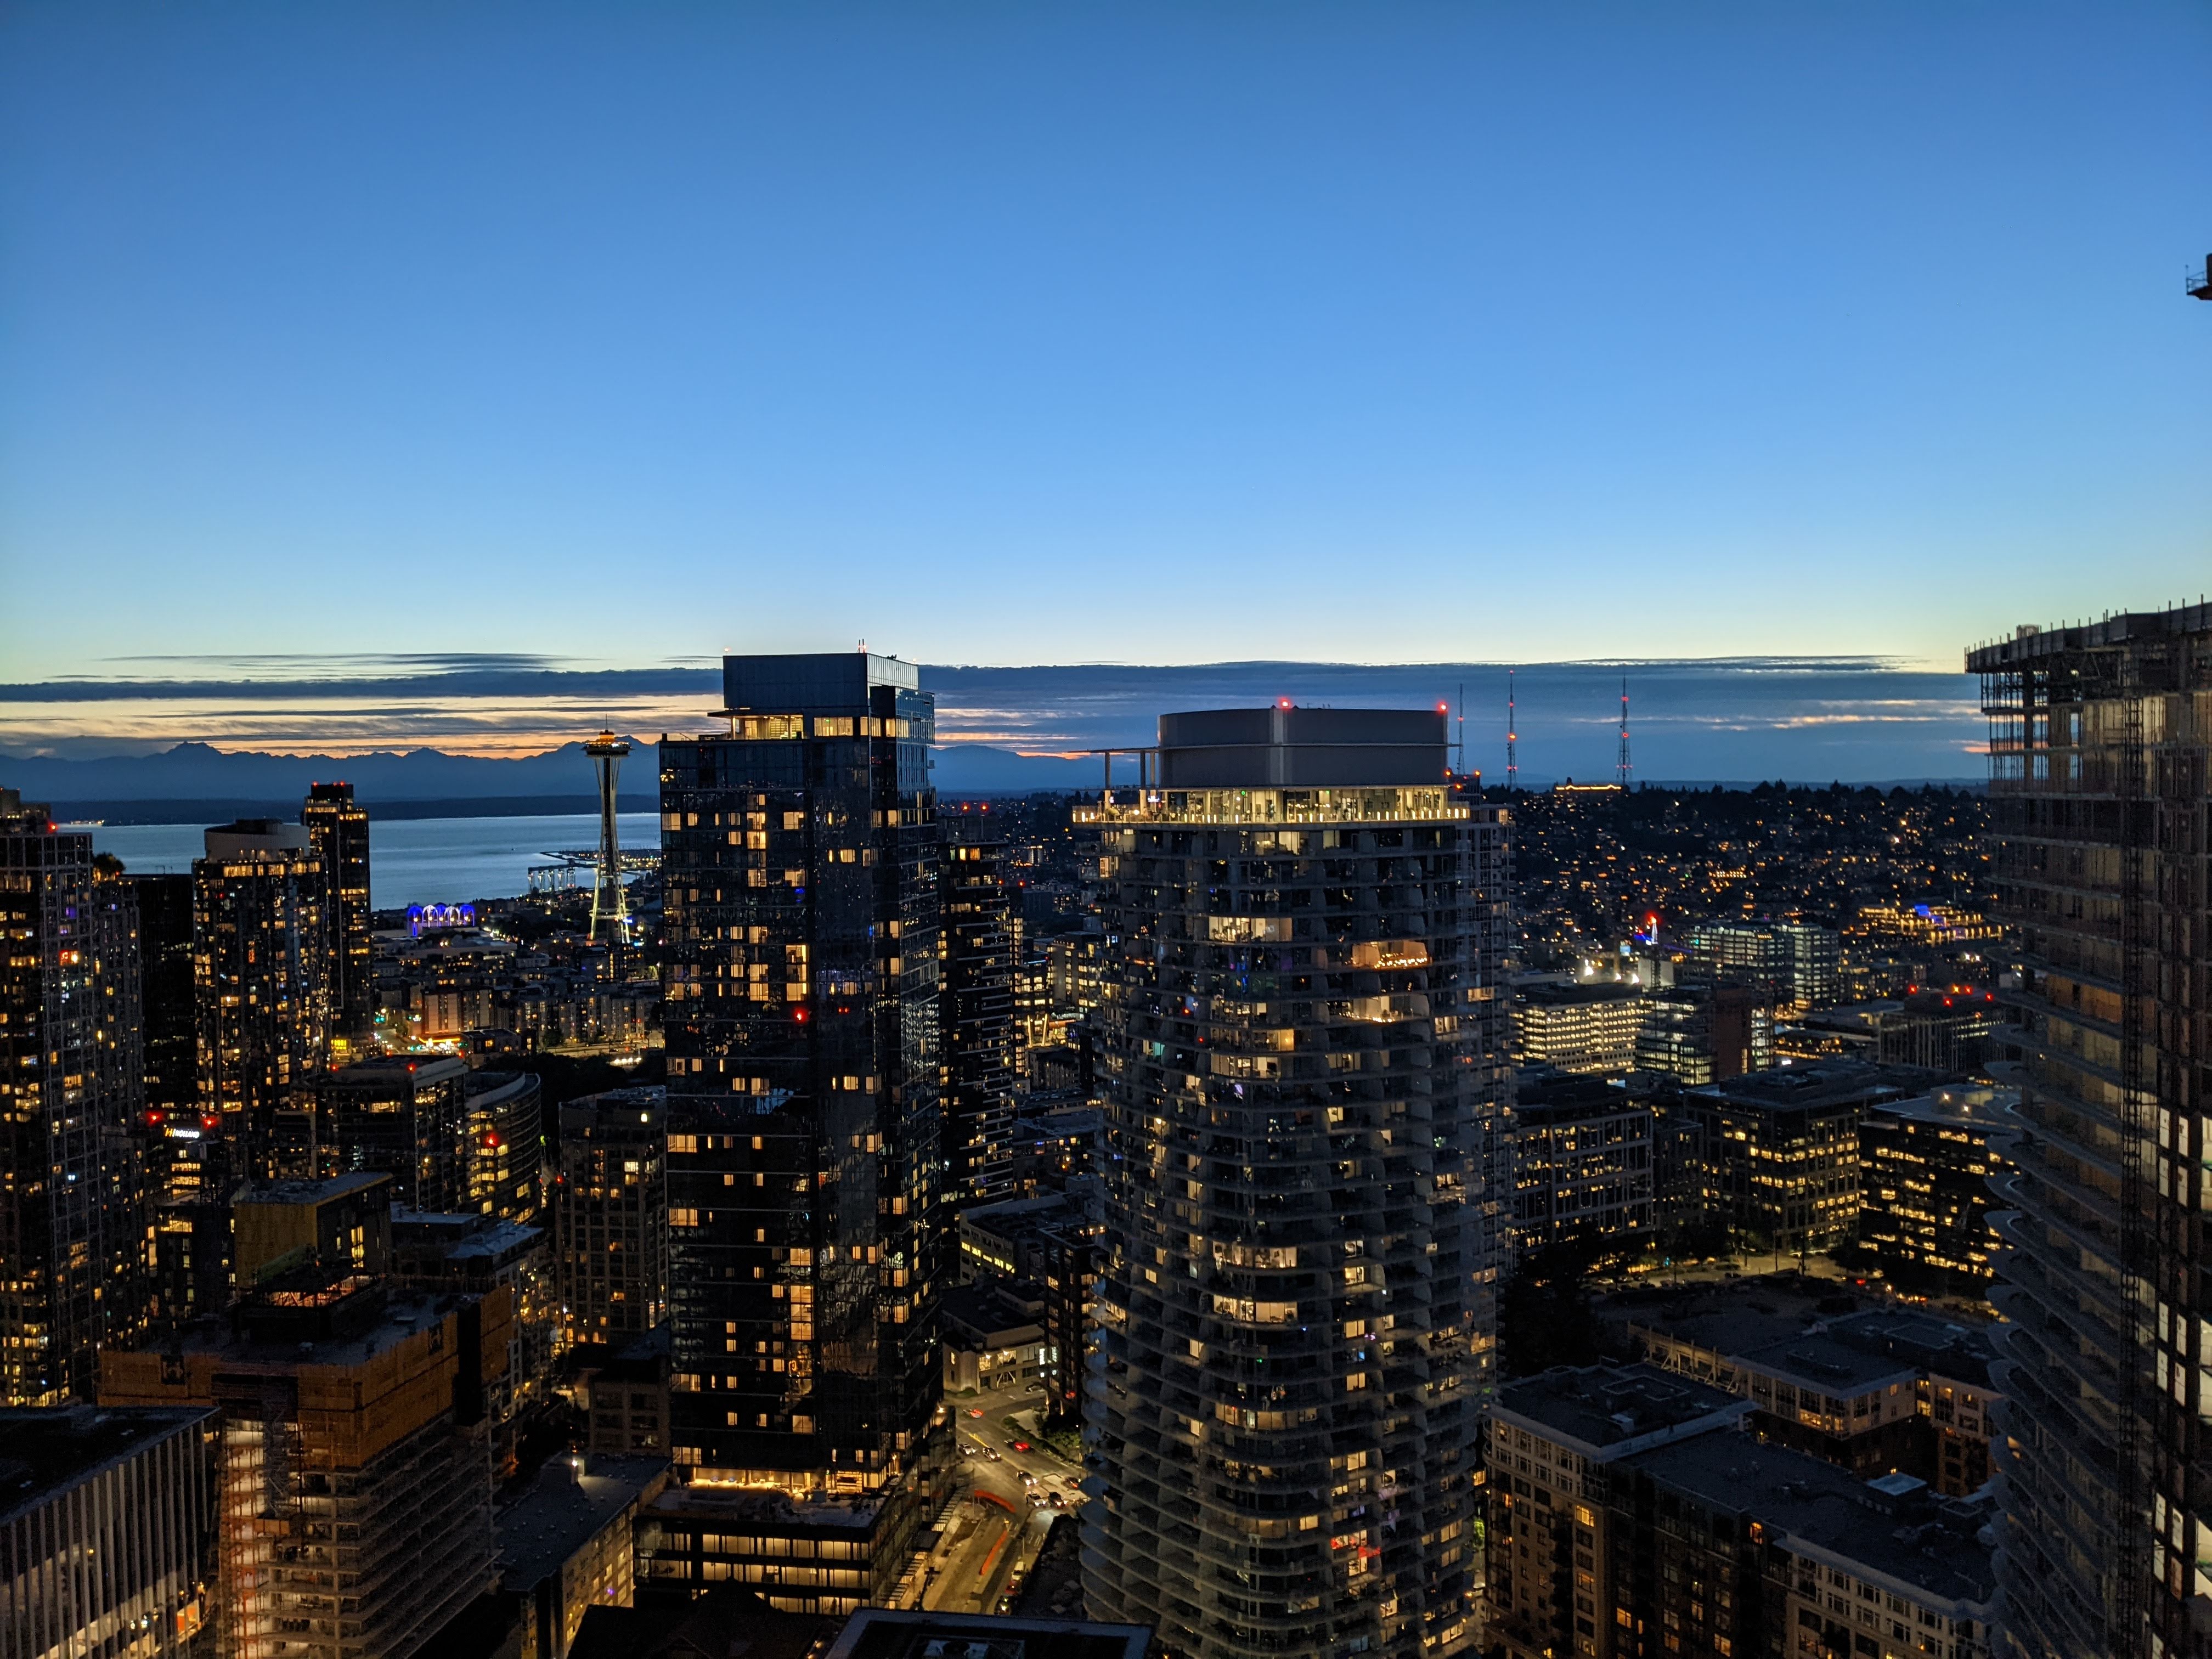 A view of Seattle from the DADC rooftop.